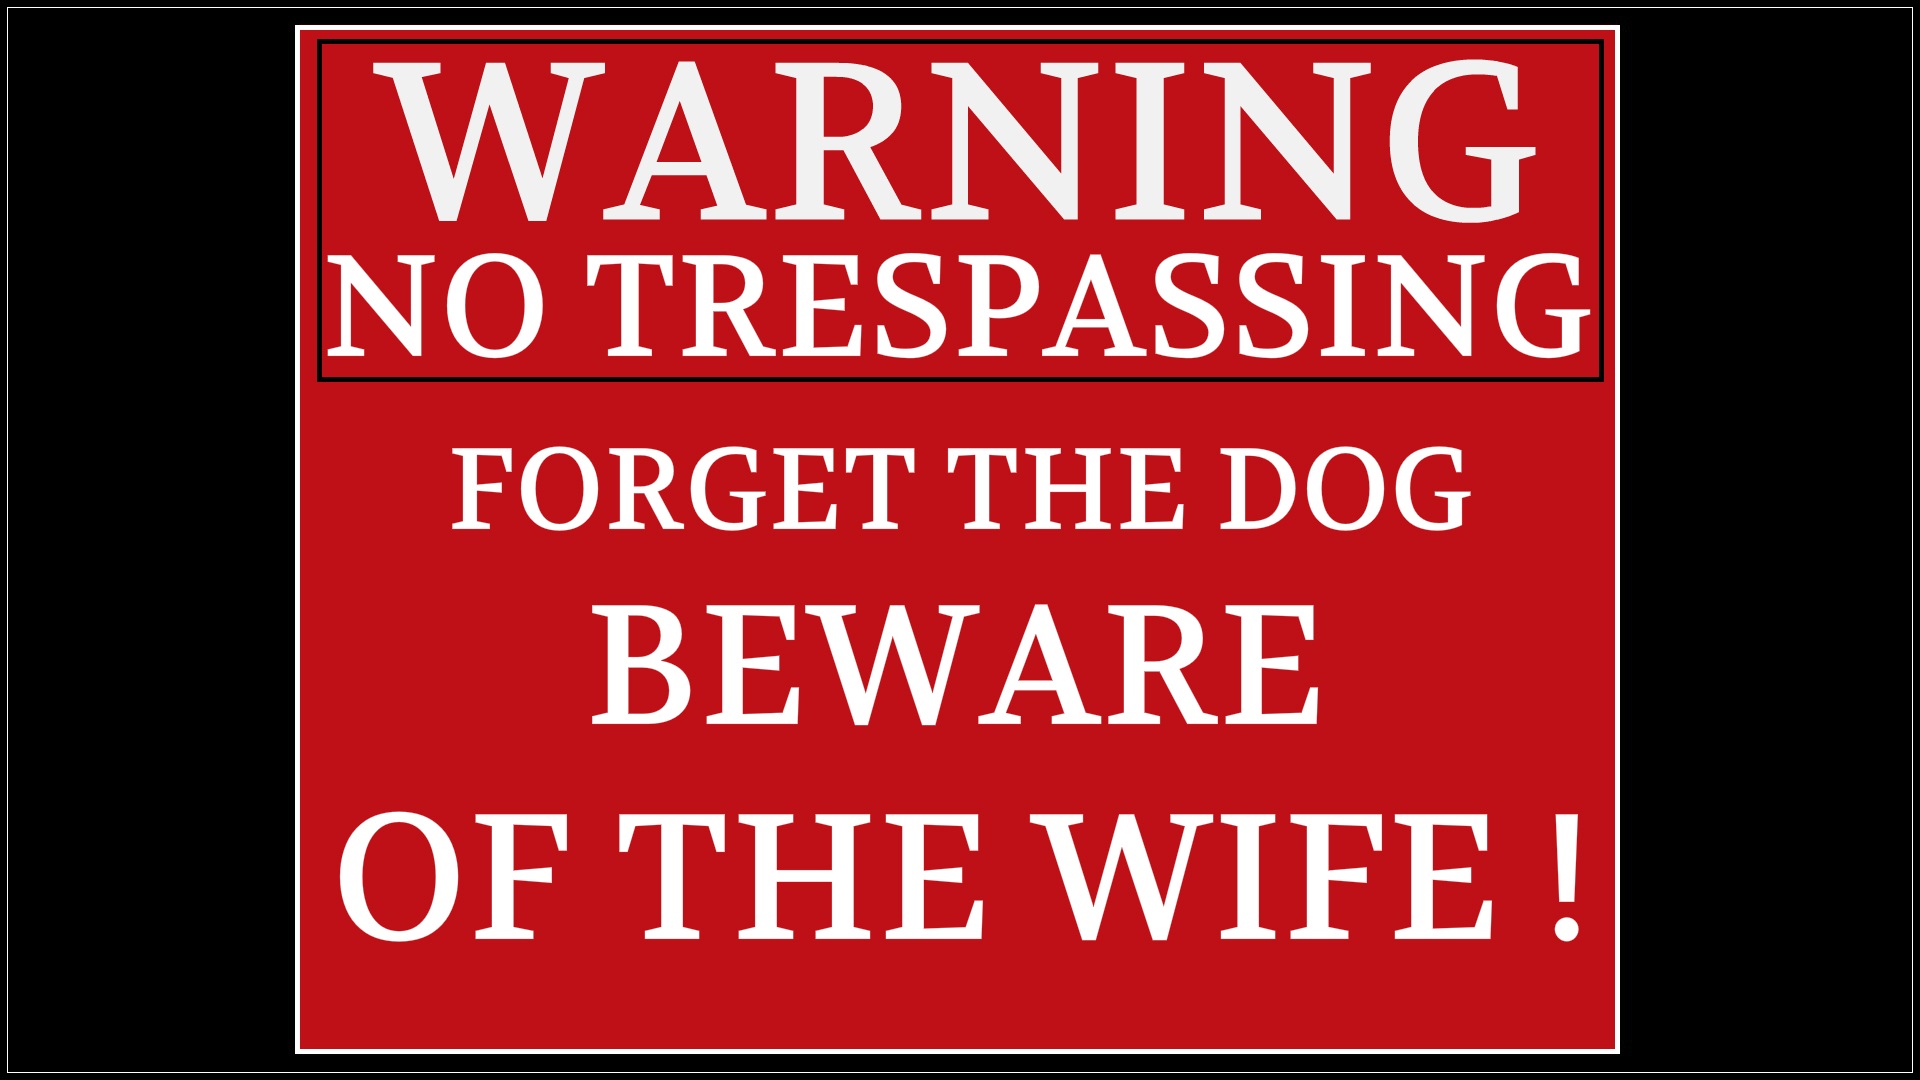 misc, sign, funny, humor, red, warning HD wallpaper